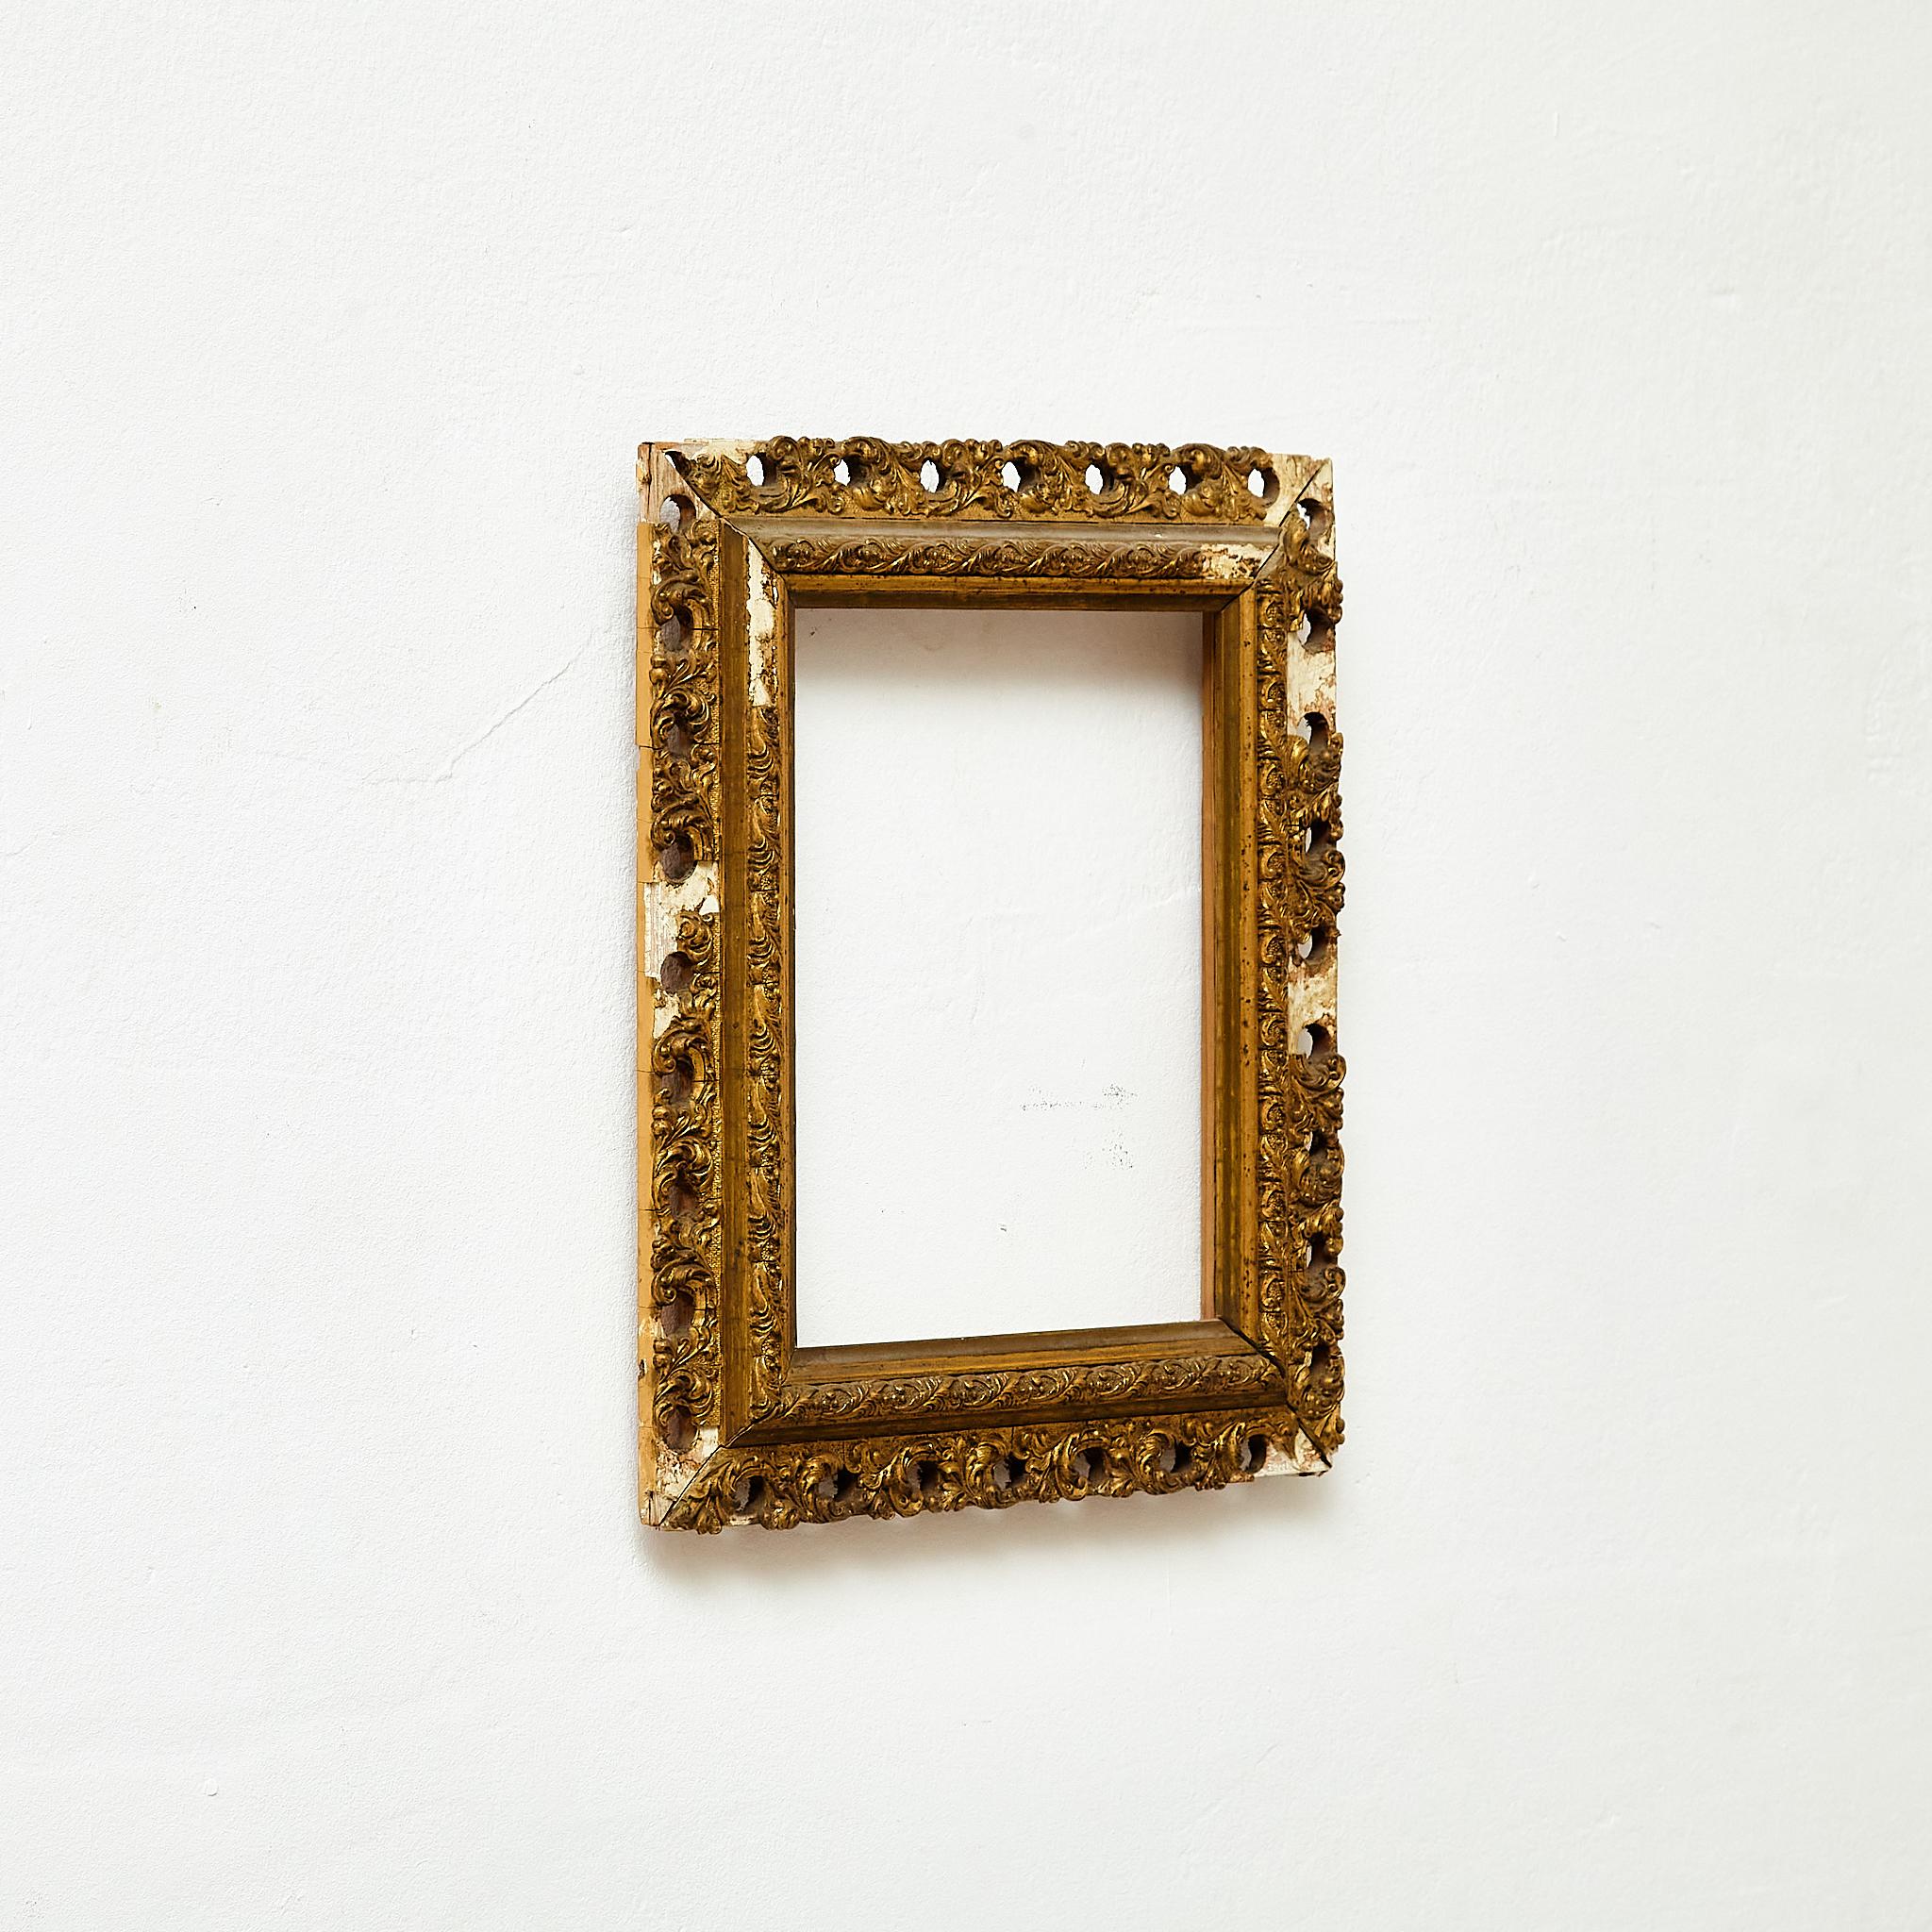 Antique Ornament Gold Wood Frame.

Manufactured France, circa 1930.

Materials:
Wood

Dimensions: 
D 3.5 x W 30 cm x H 35.5 cm

In original condition, with minor wear consistent with age and use, preserving a beautiful patina.

Important information